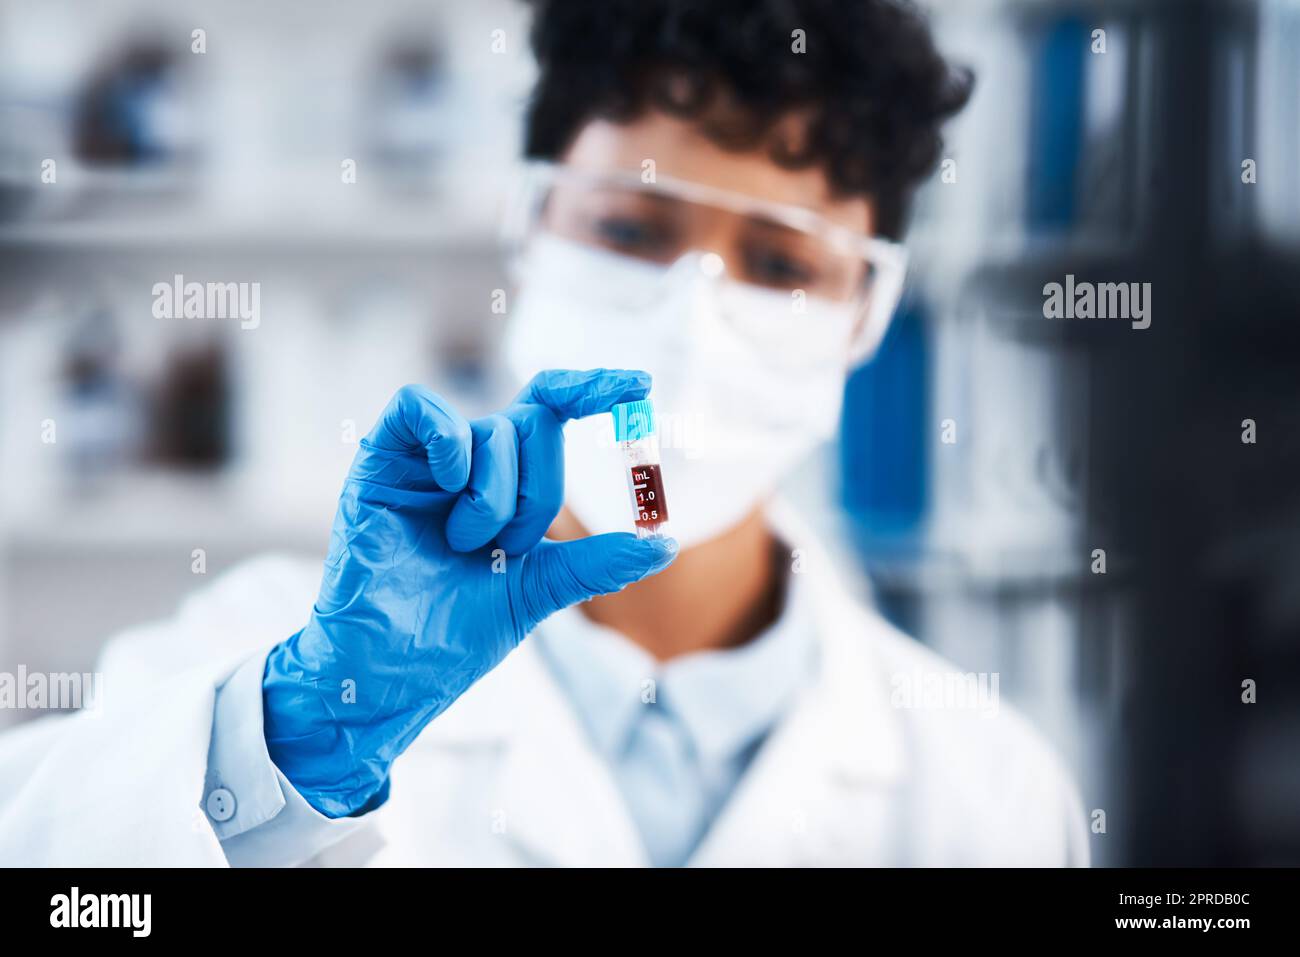 Working hard to create a cure thatll save many lives. Closeup shot of a young scientist working with samples in a lab. Stock Photo